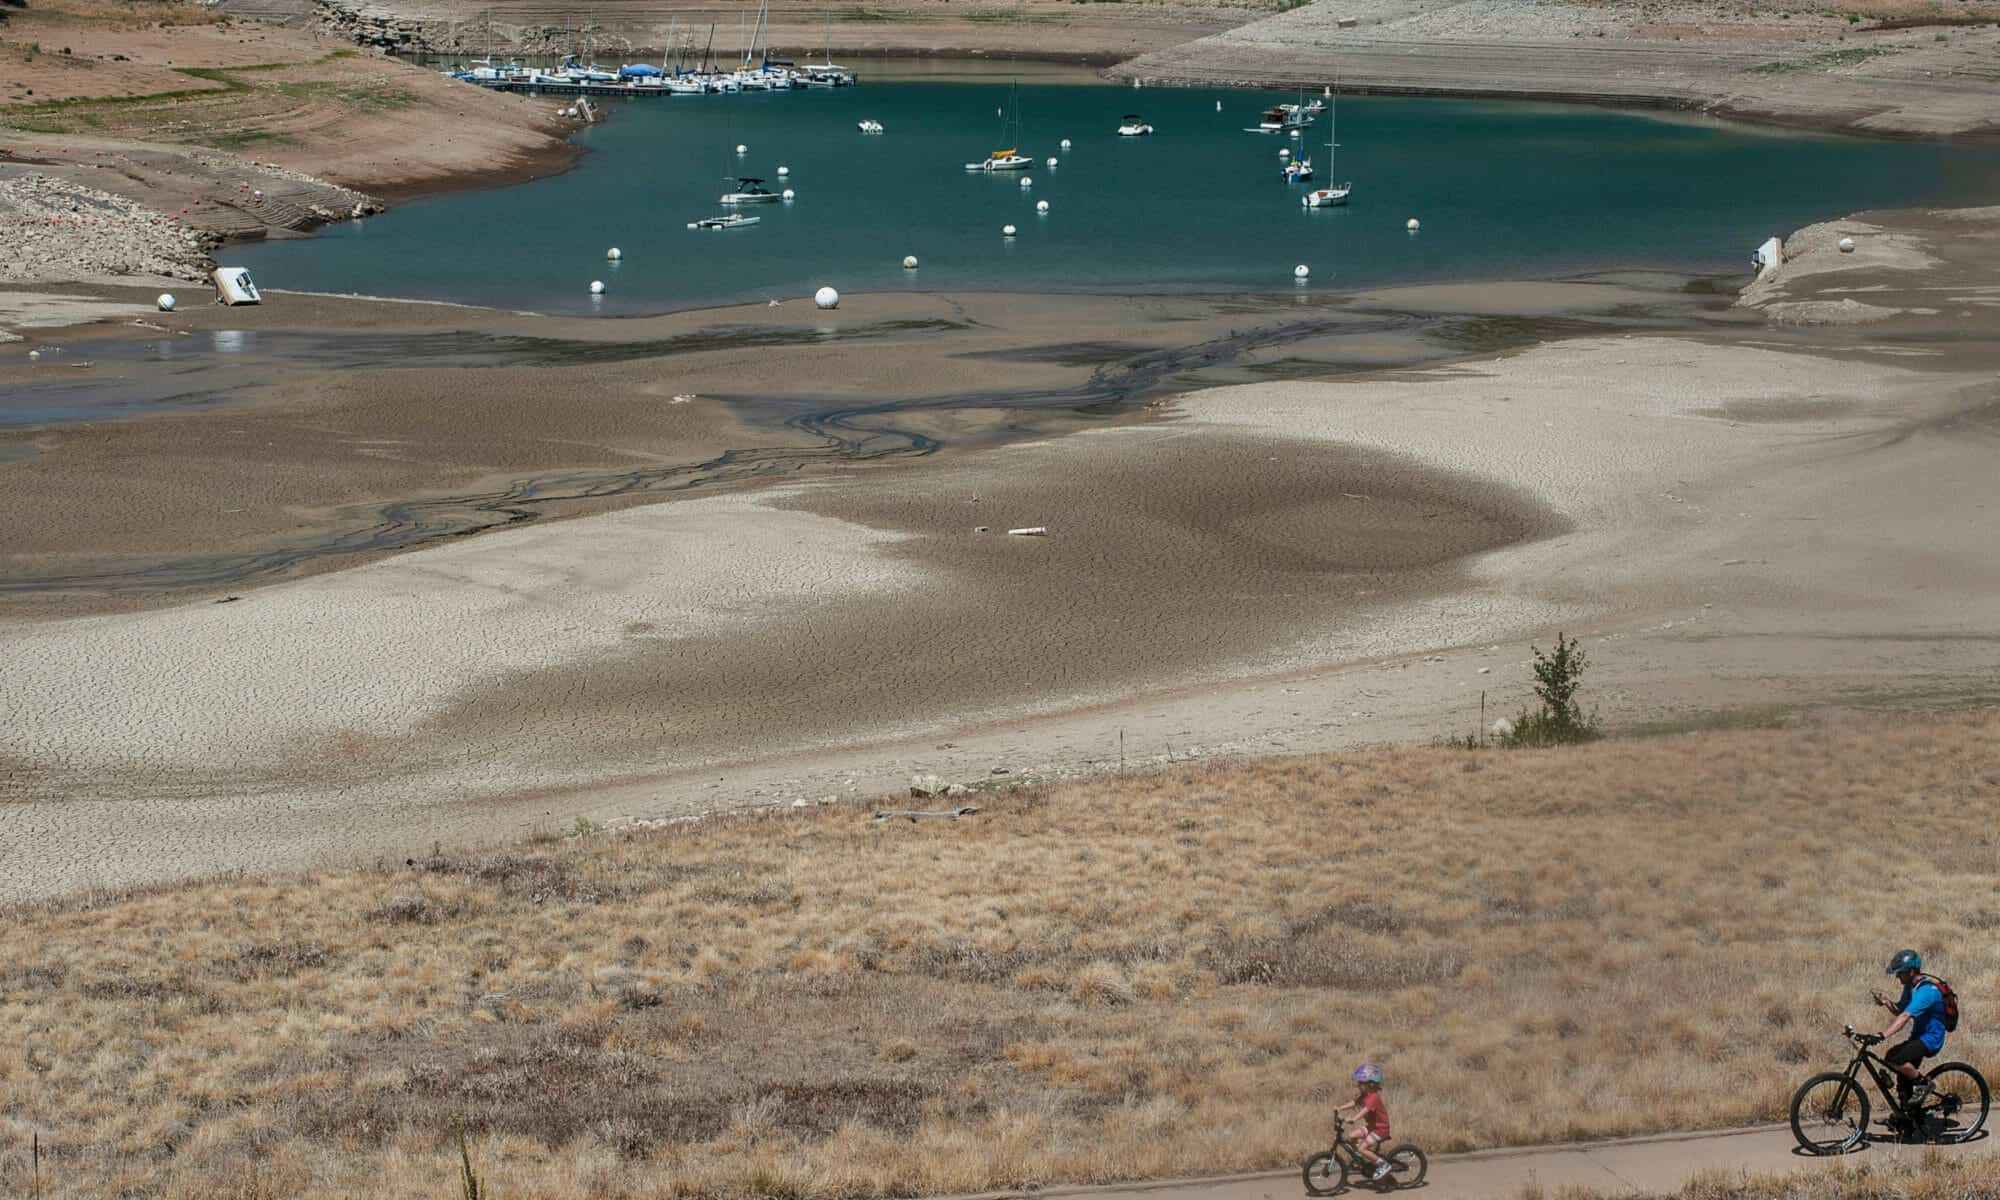 photo: low water level in reservoir. Plan to slow creeping Colorado River crisis could drain more water from Blue Mesa, Flaming Gorge reservoirs